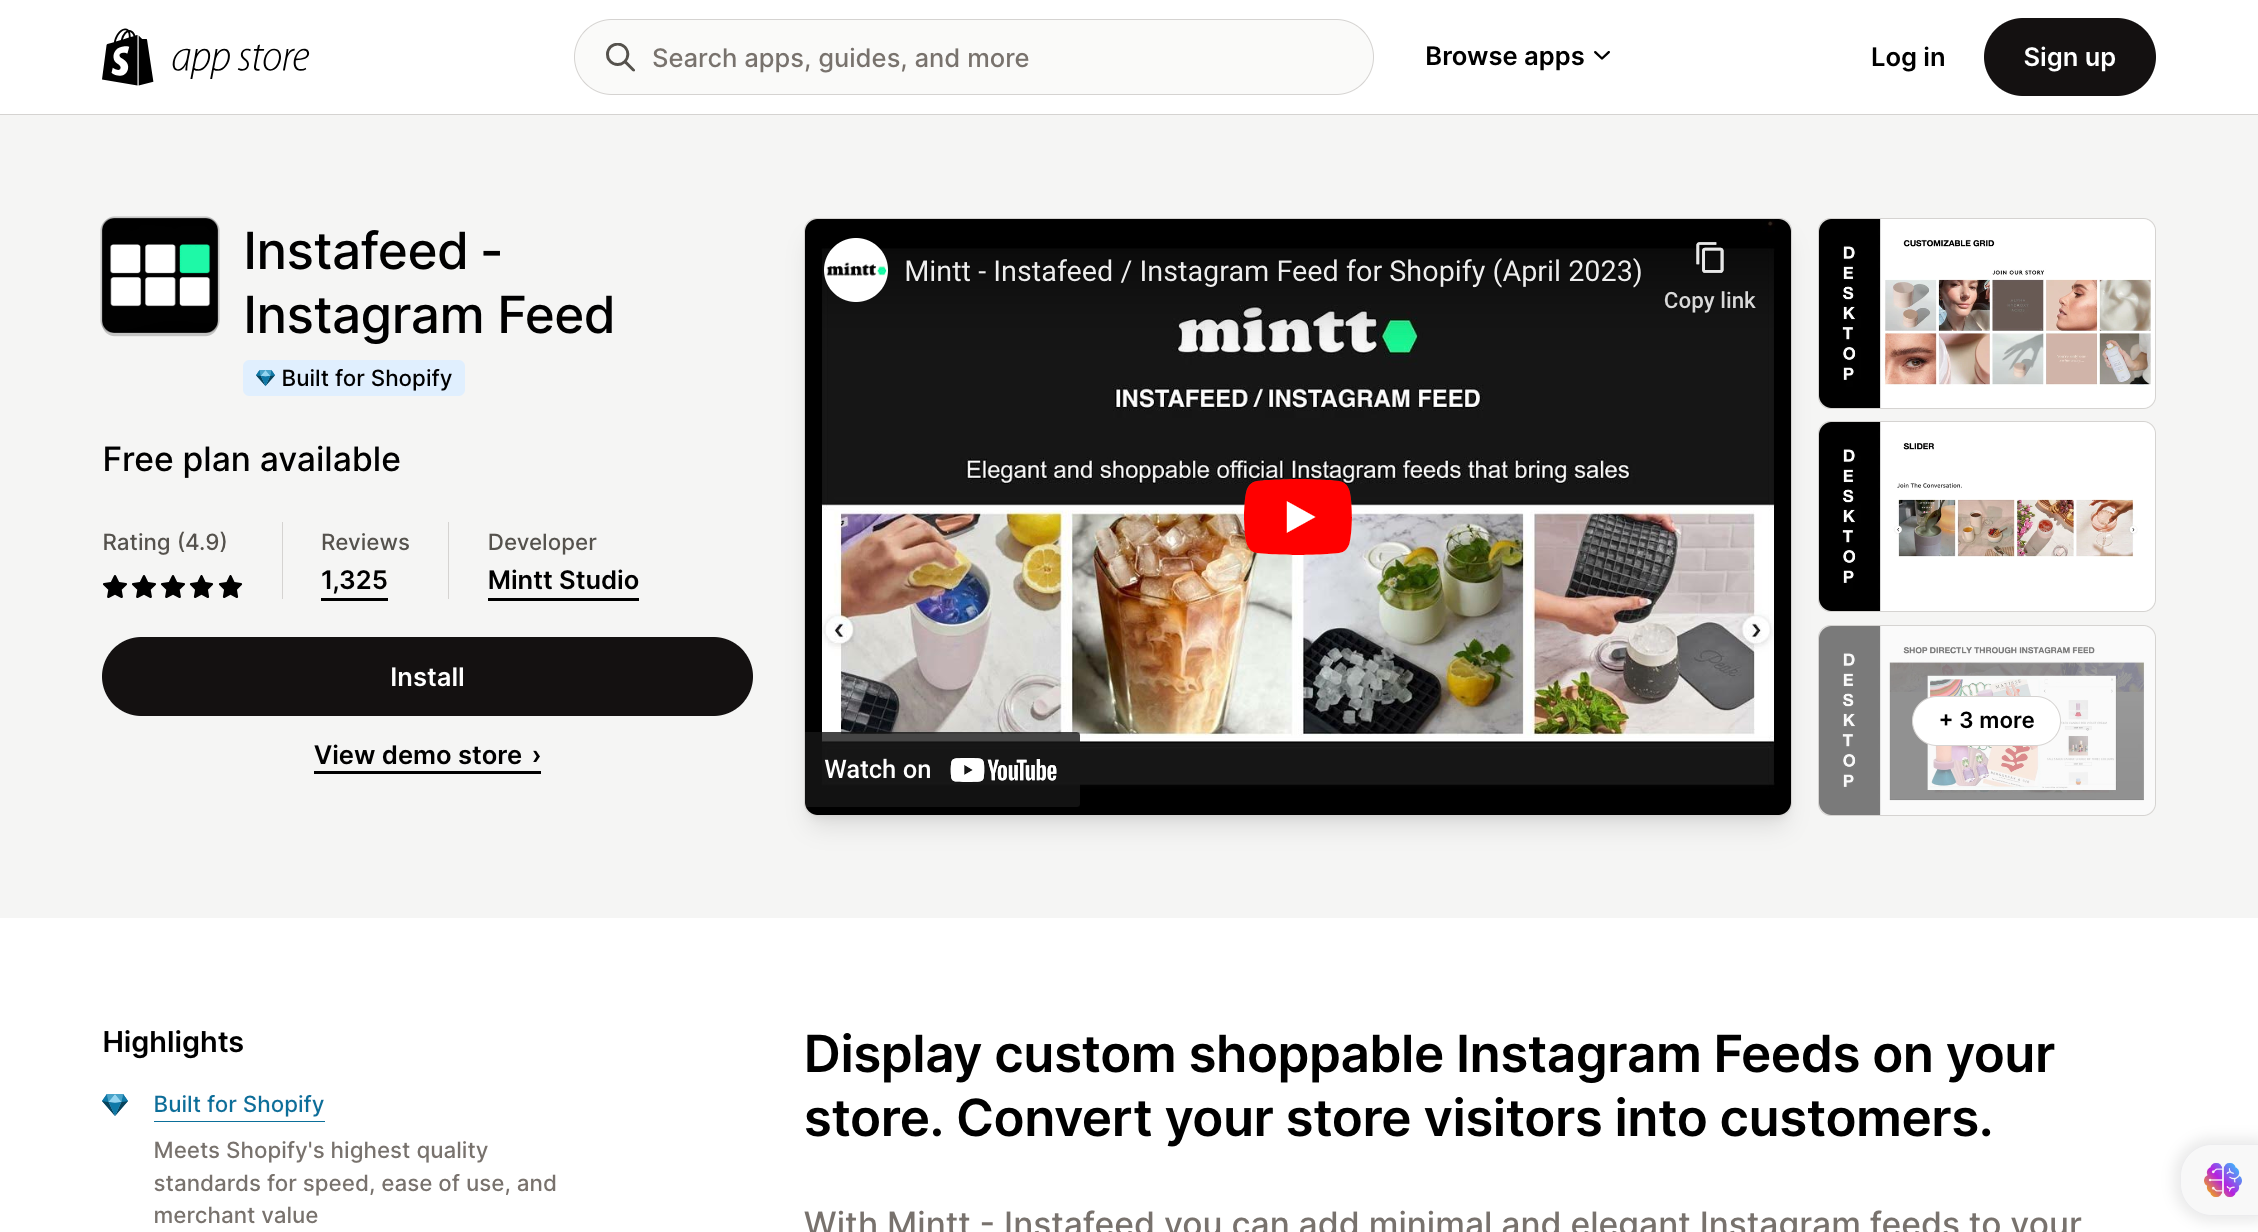 Instafeed-‐-Instagram-Feed-Boost-sales-and-trust-with-official-Instagram-shop-feeds-Shopify-App-Store